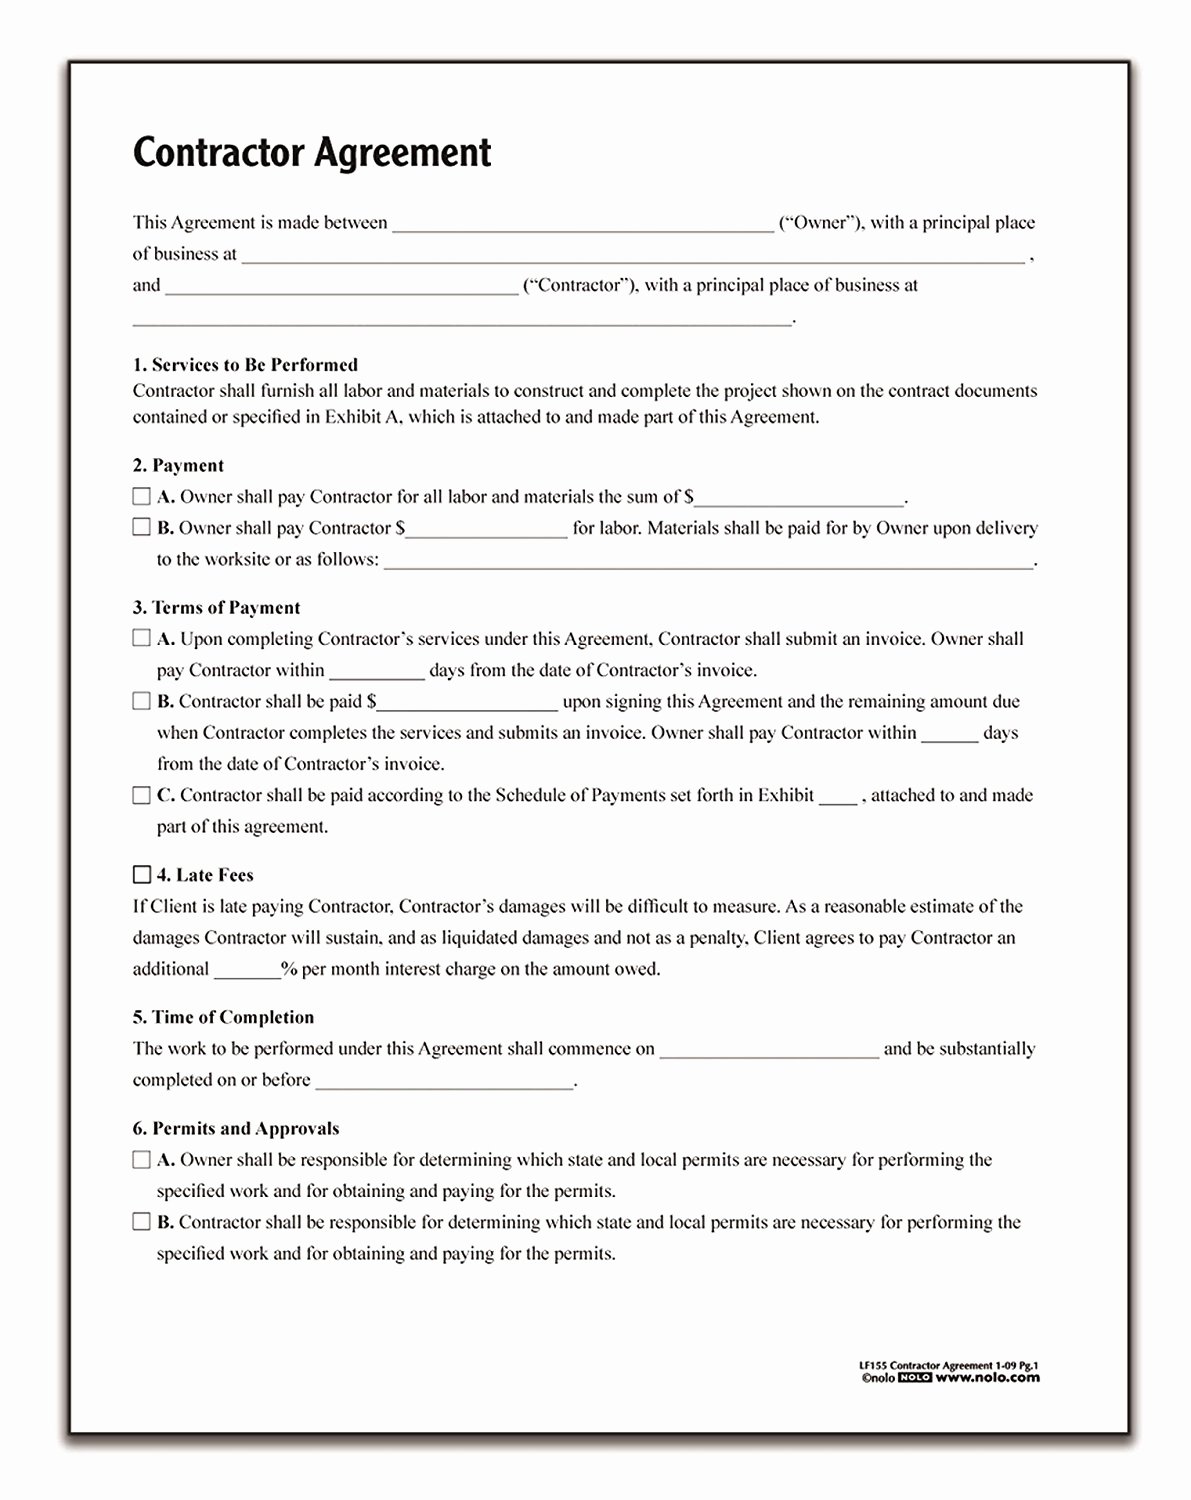 Employee Key Holder Agreement Template New Contract Agreement